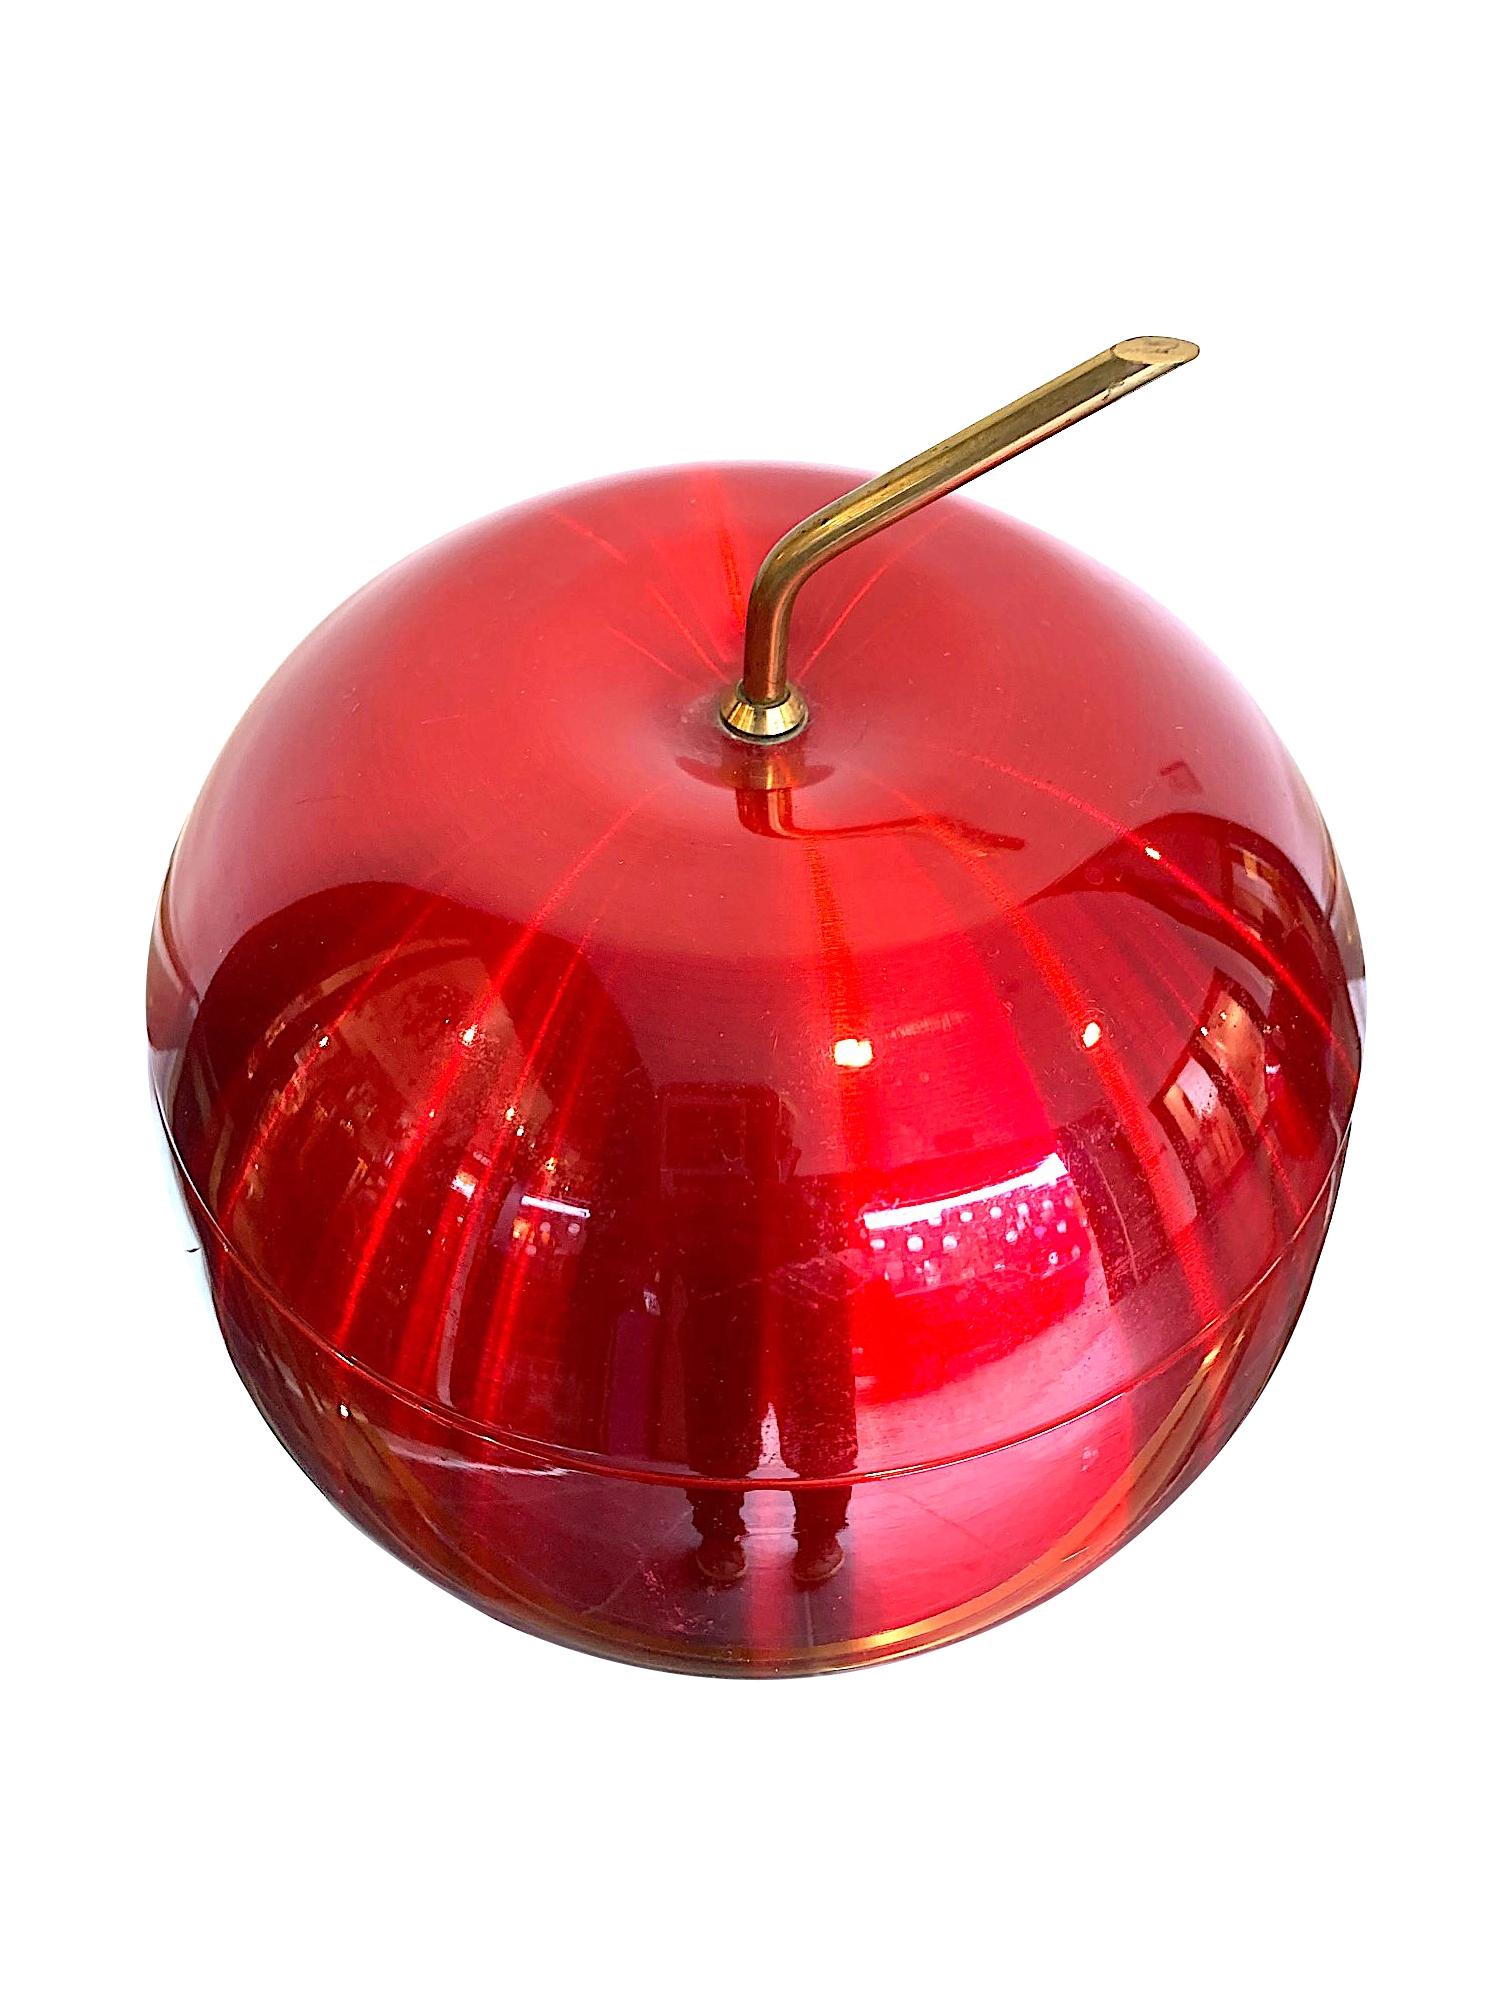 A fabulous 1970s cherry ice bucket by Daydream, Australia in vibrant red anodised metal with brass stalk handle. With Aluminium lining and separate internal lid. Stamped on the underside 